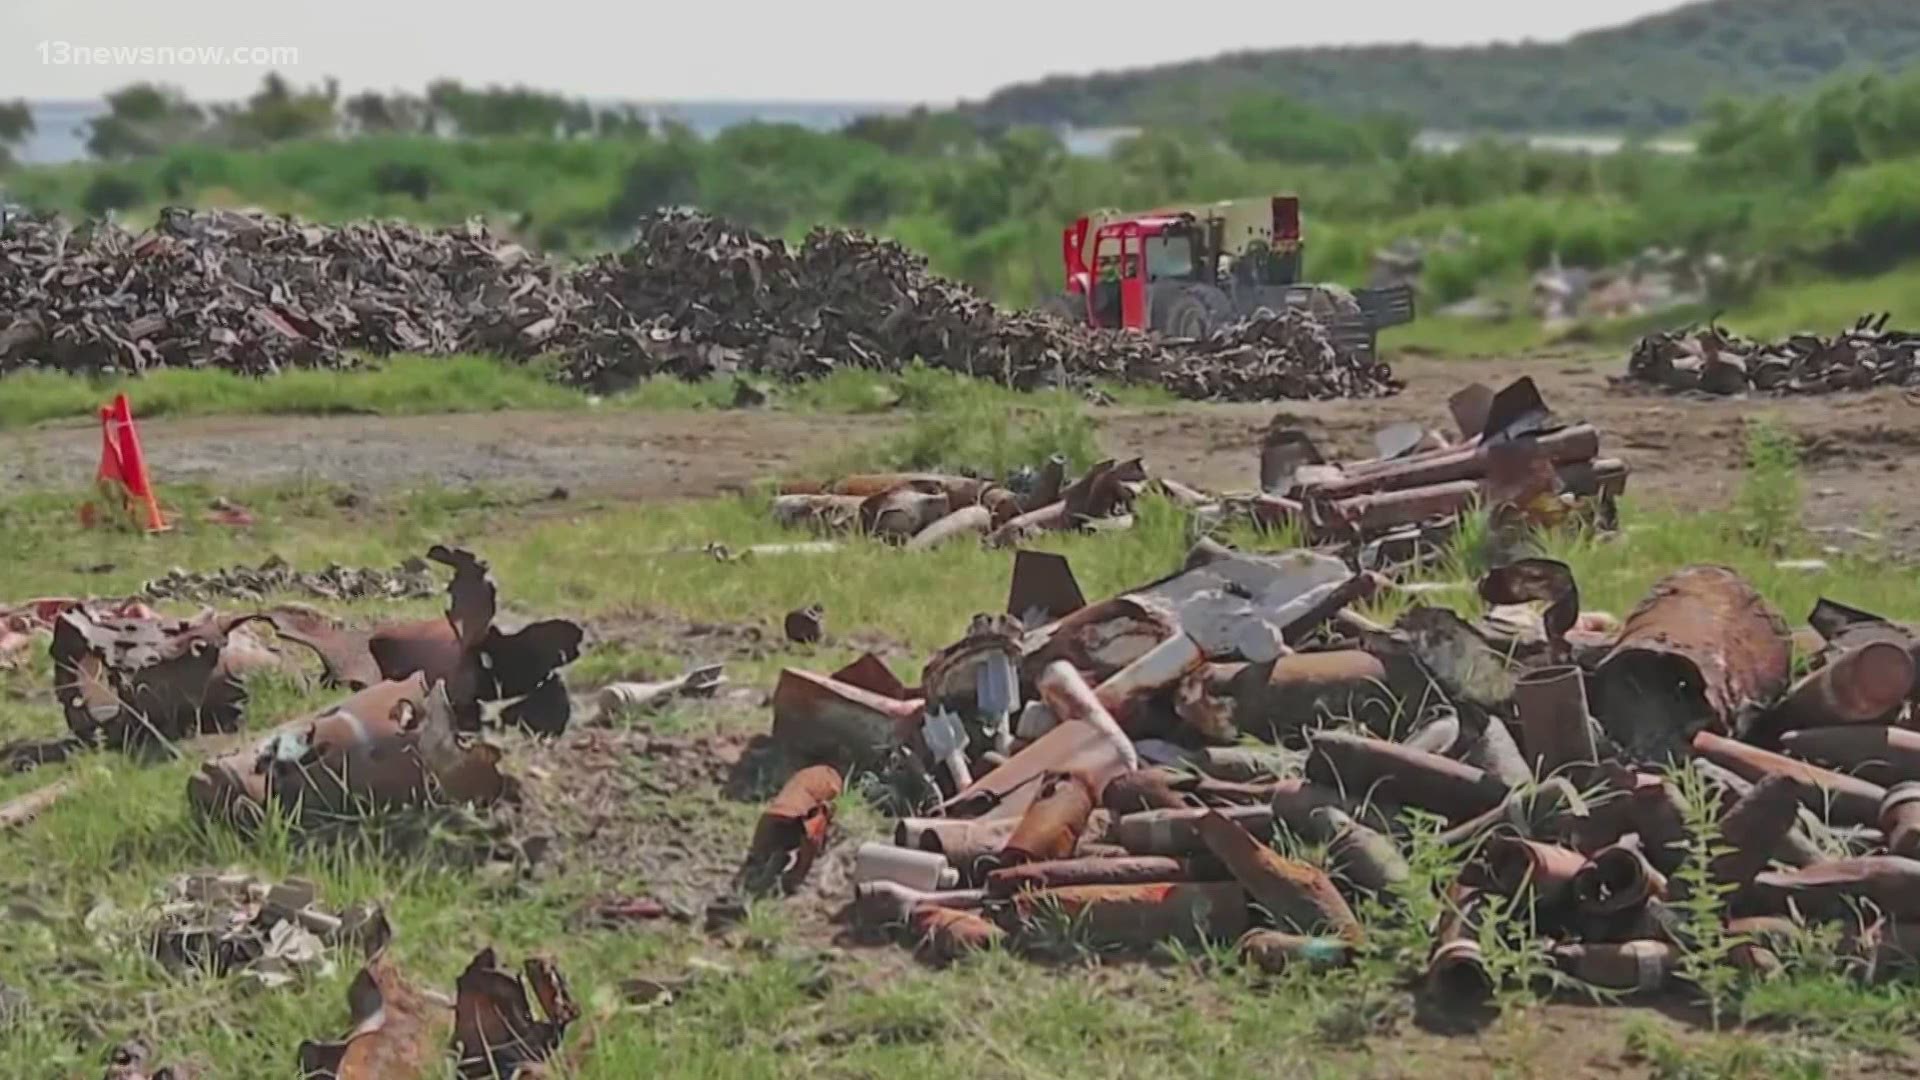 A new GAO report says cleaning up the former bombing range on Vieques Island will cost more than $800 million. 13News Now Mike Gooding has more details.